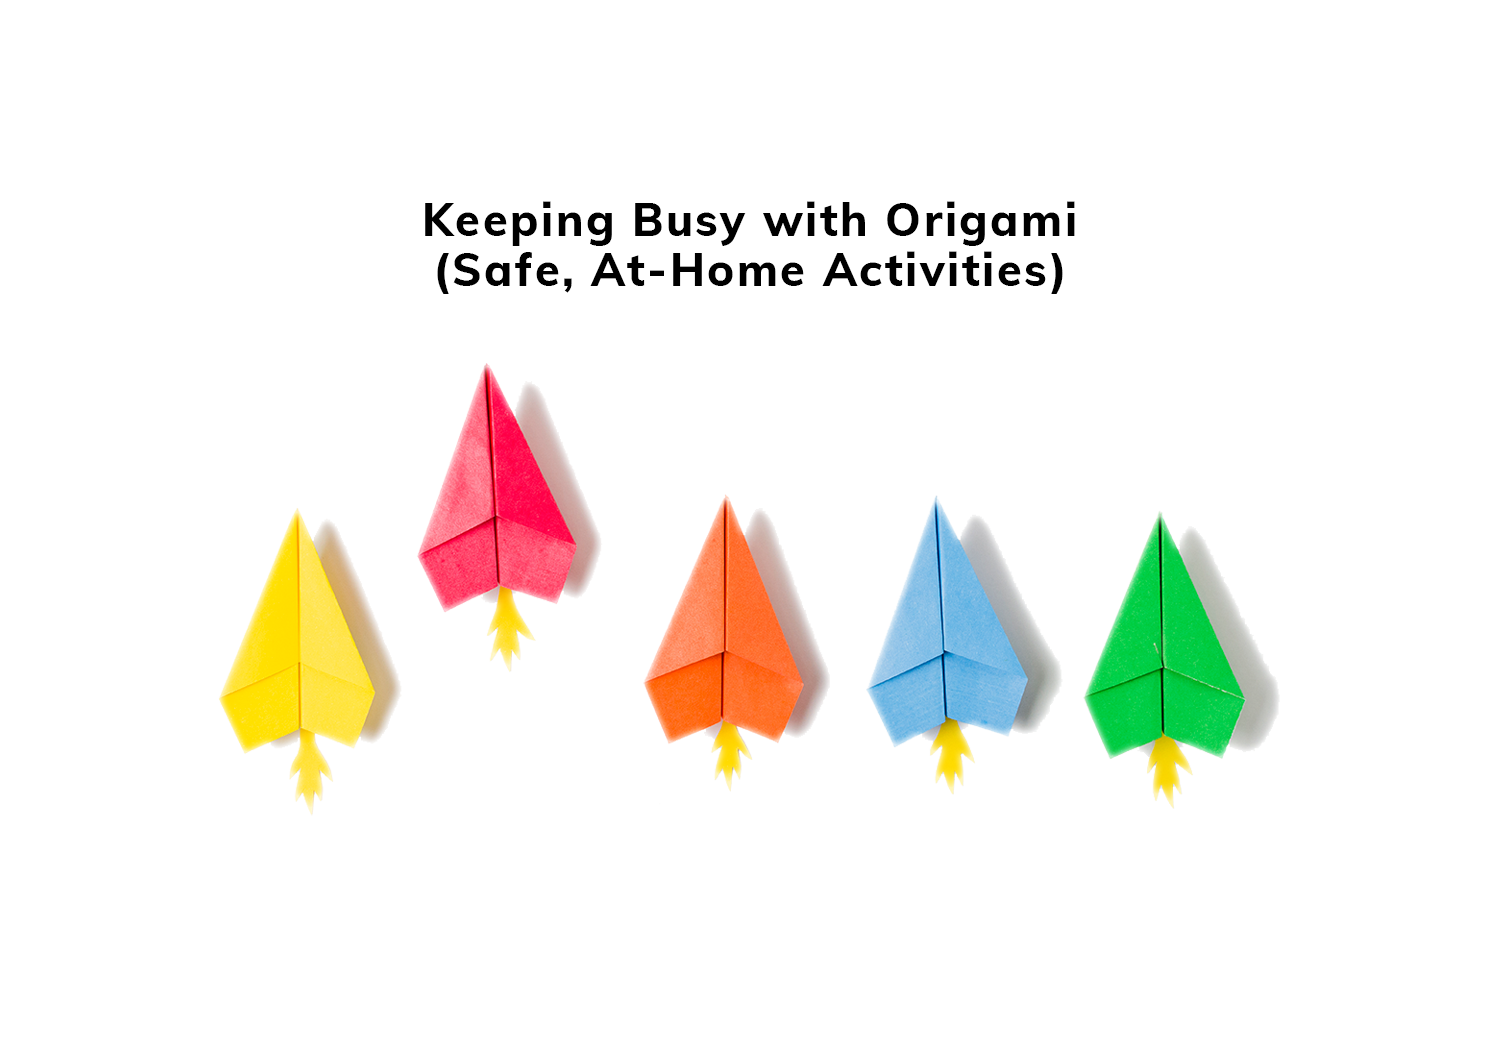 Safe, At-Home Activities | Keeping Busy with Origami, by Patrick Clare